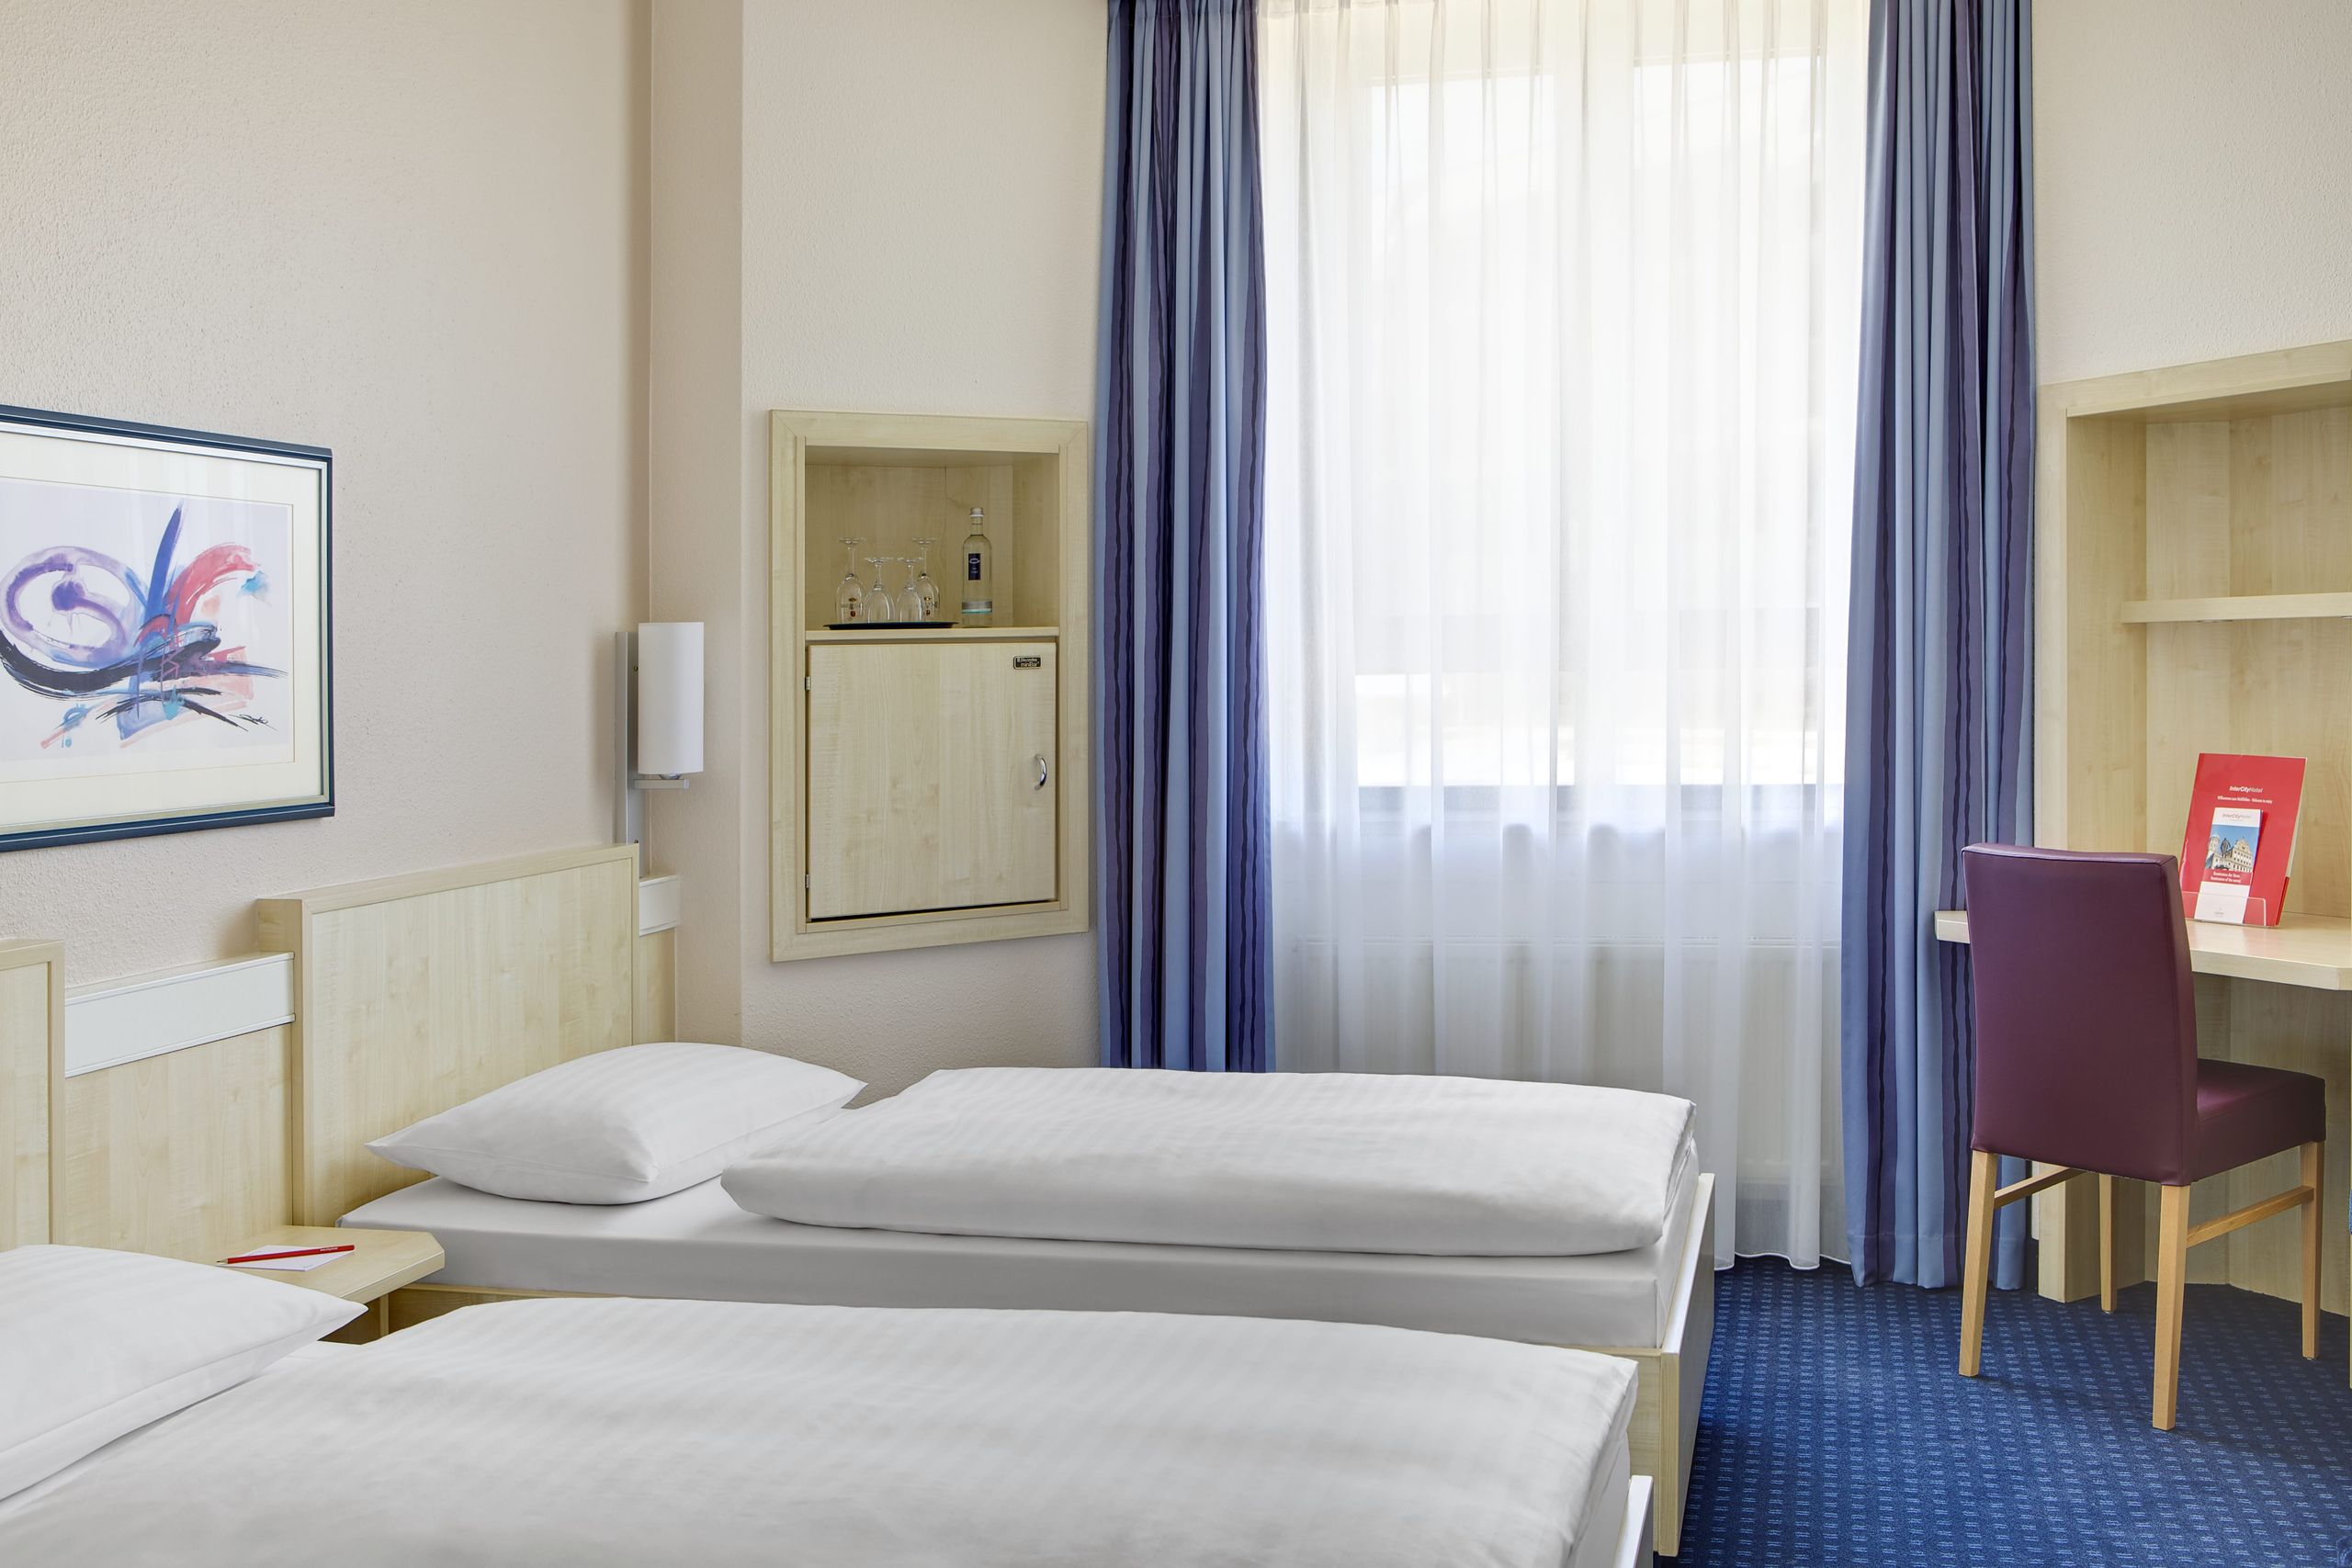 IntercityHotel Ulm - Business Plus Zimmer with separate beds